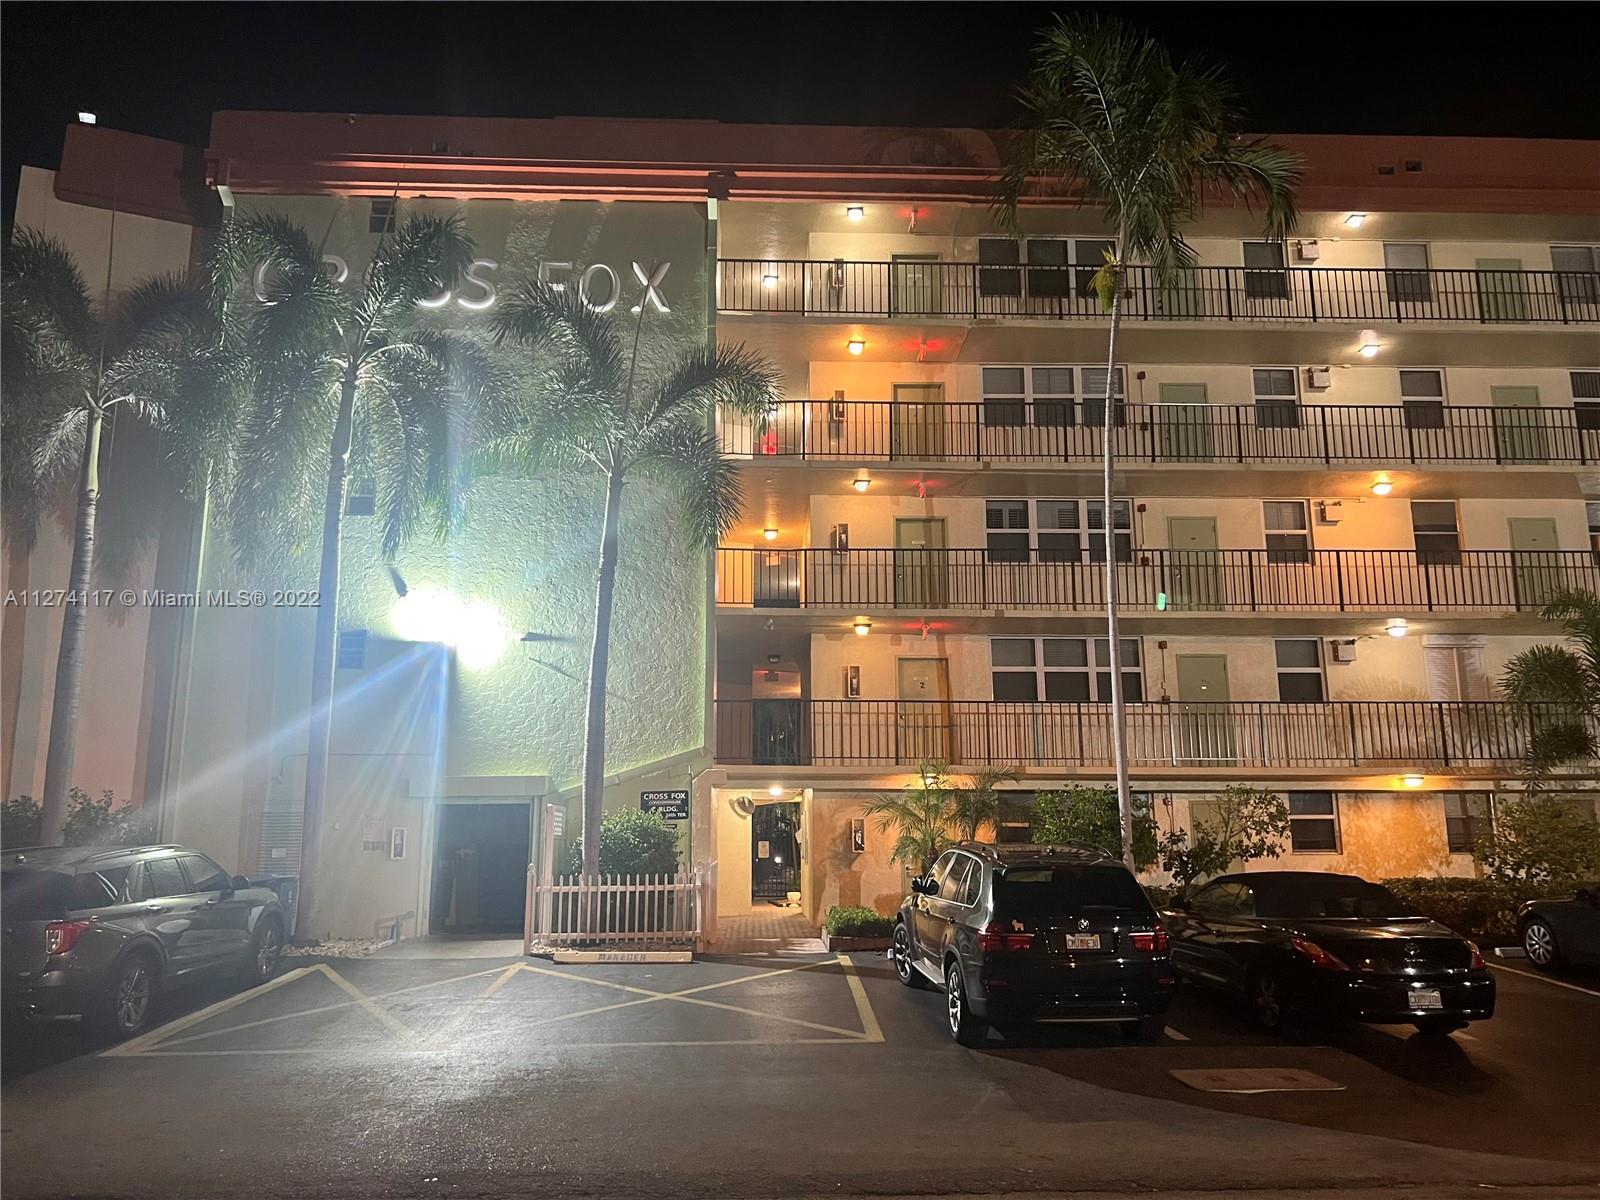 Enjoy owning in this unique condo East of US1 just a few blocks from Fort Lauderdale by the Sea with